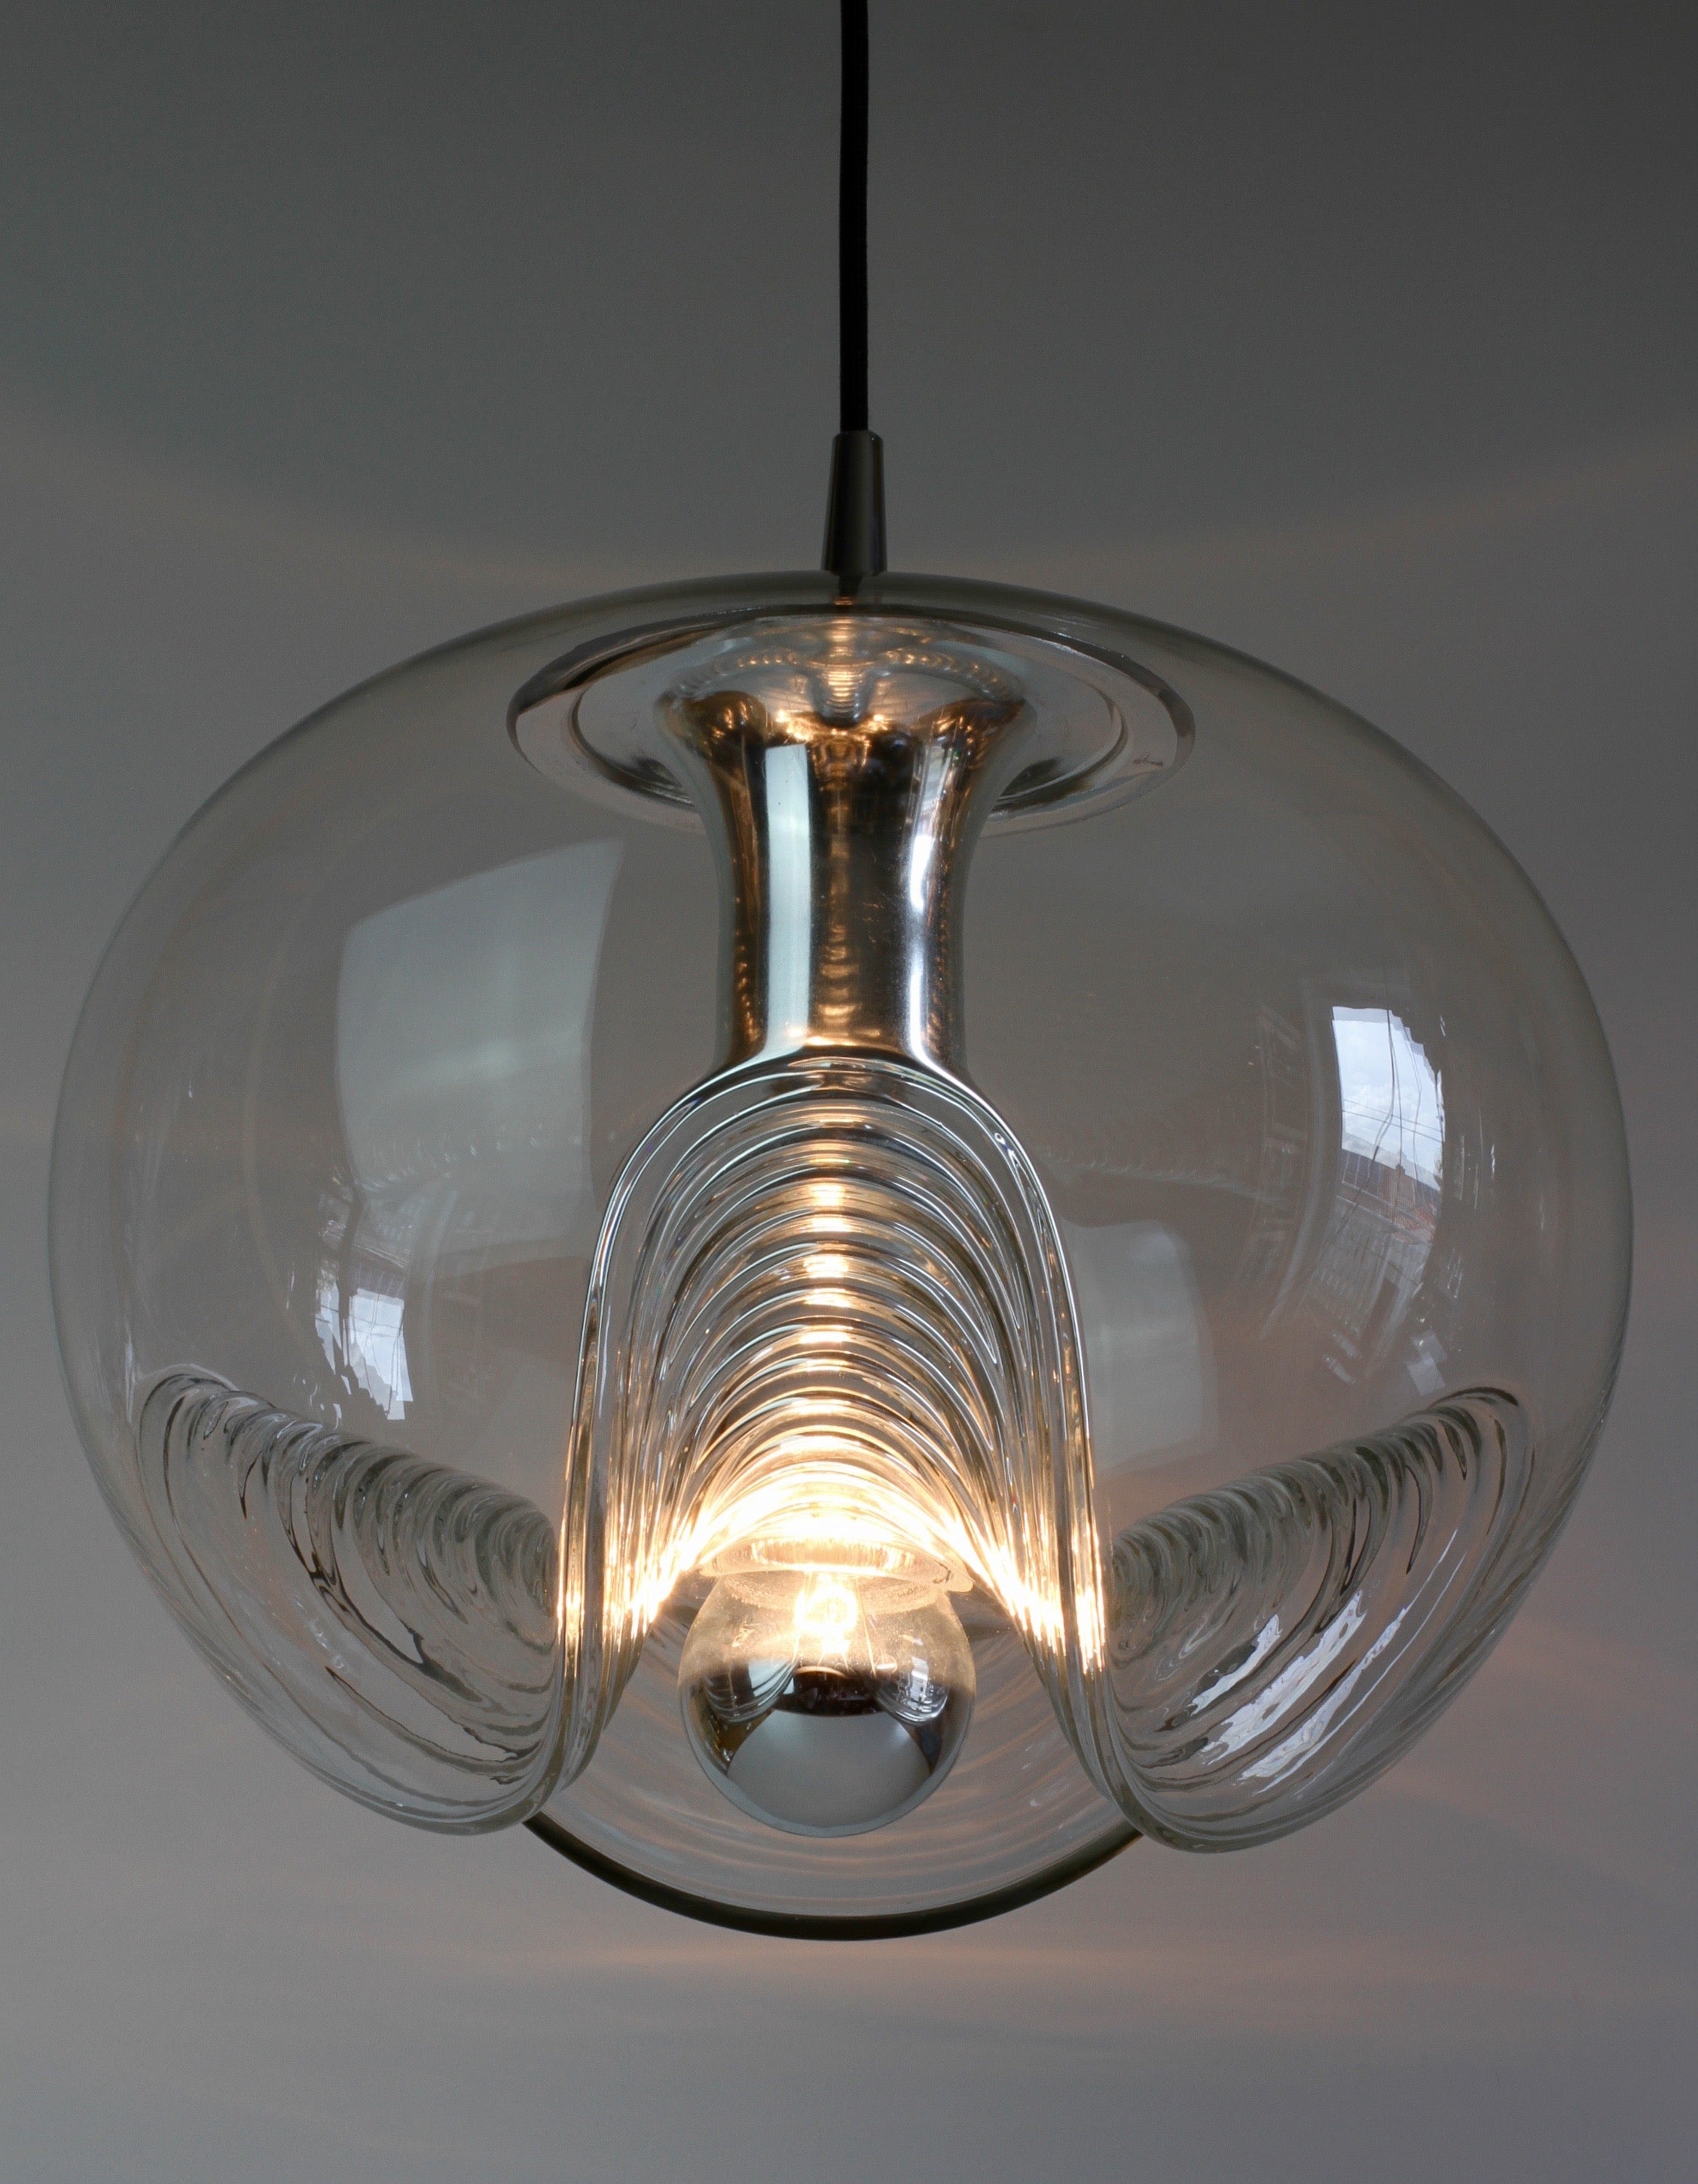 Set of three beautiful mid-century designed hanging ceiling pendant lights by iconic German lighting manufacturer Peill & Putzler in the 1970s. This is an absolutely classic piece of design, featuring a clear glass globe shade with a waved or ribbed